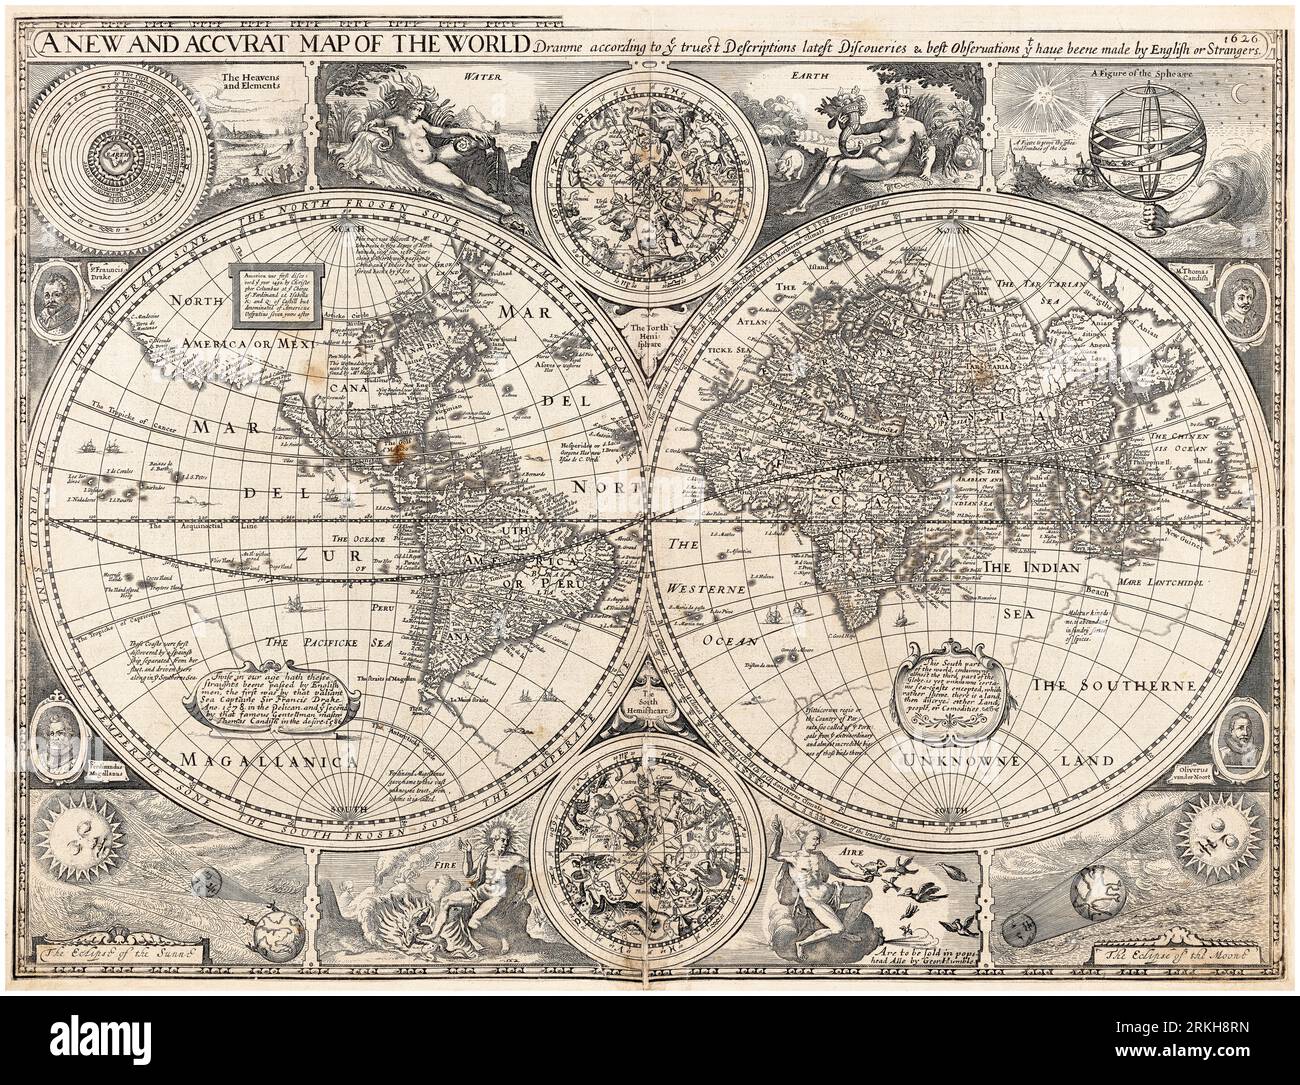 Vintage 17th Century World Map, A New and Accurate Map of the World, by John Speed, 1627 Stock Photo